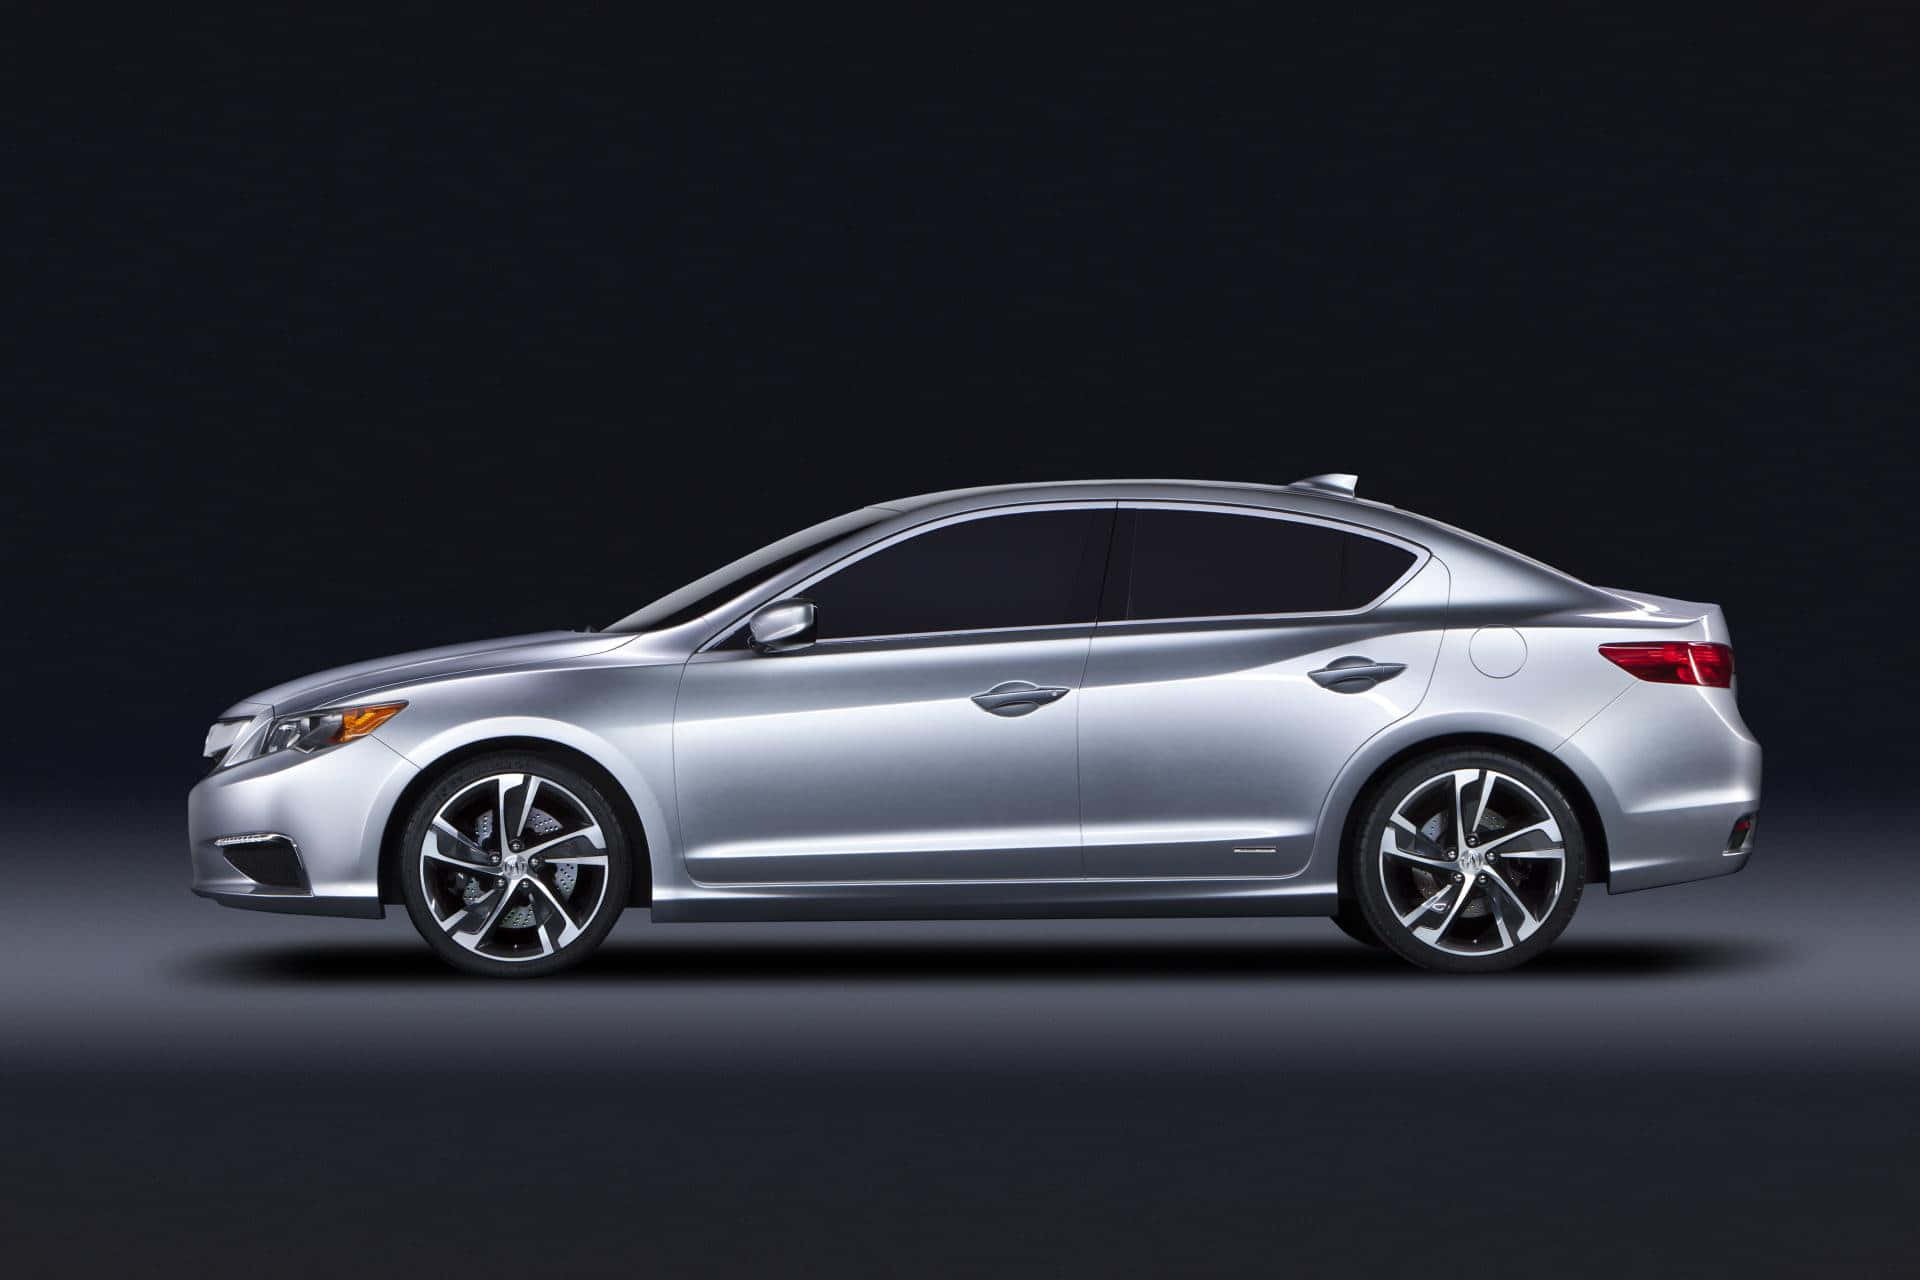 Stunning Acura ILX in Motion Wallpaper